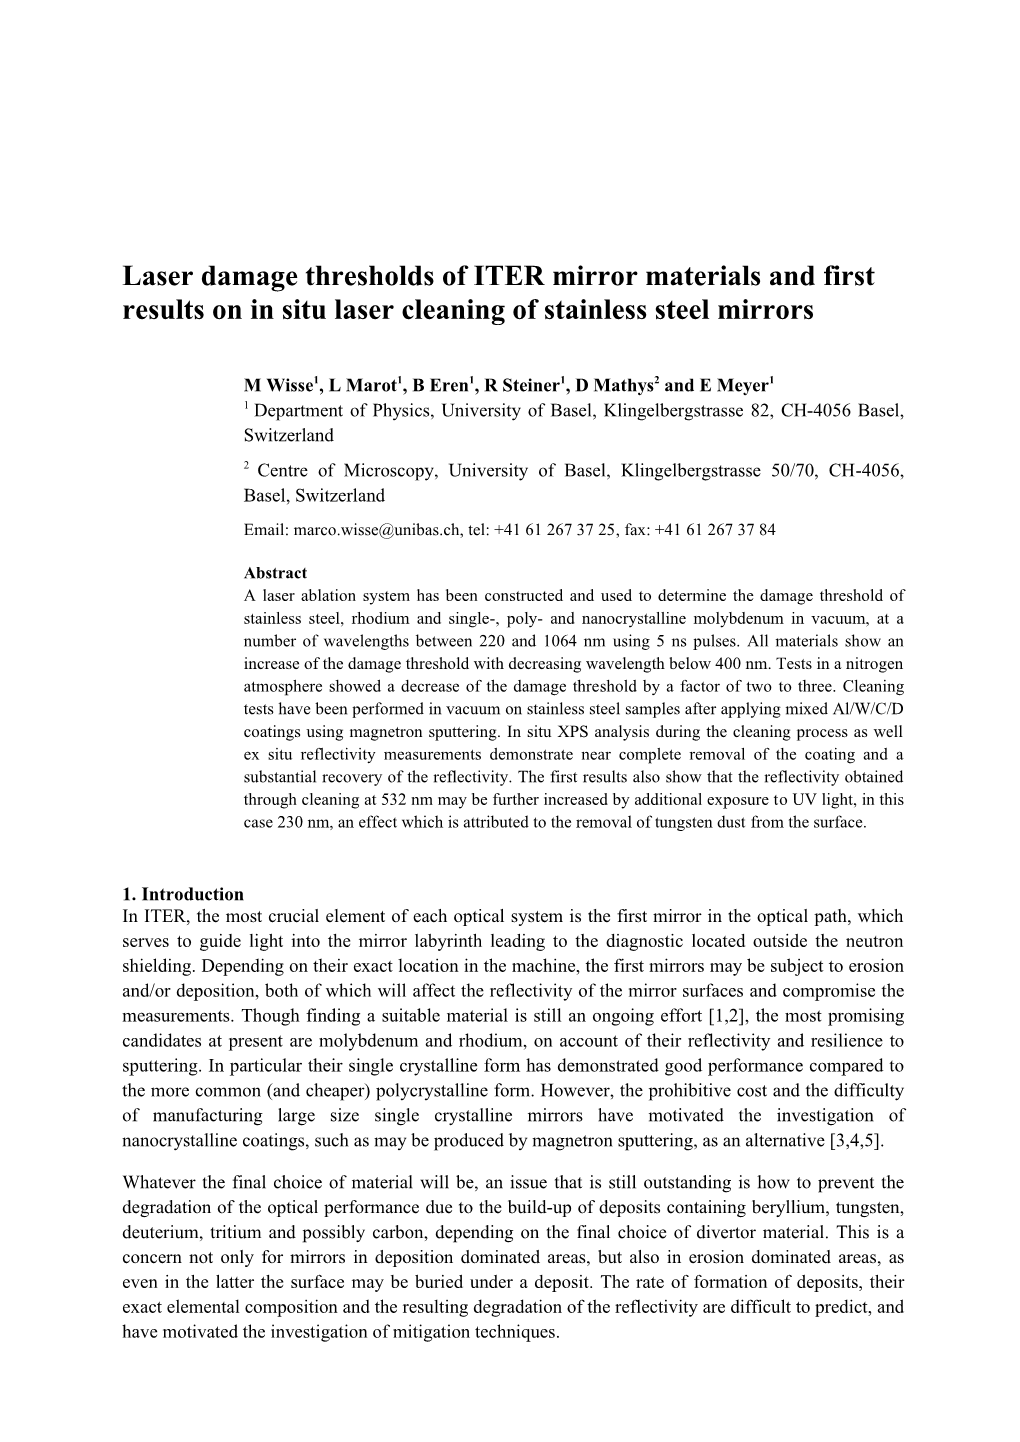 Laser Damage Thresholds of ITER Mirror Materials and First Results on in Situ Laser Cleaning of Stainless Steel Mirrors